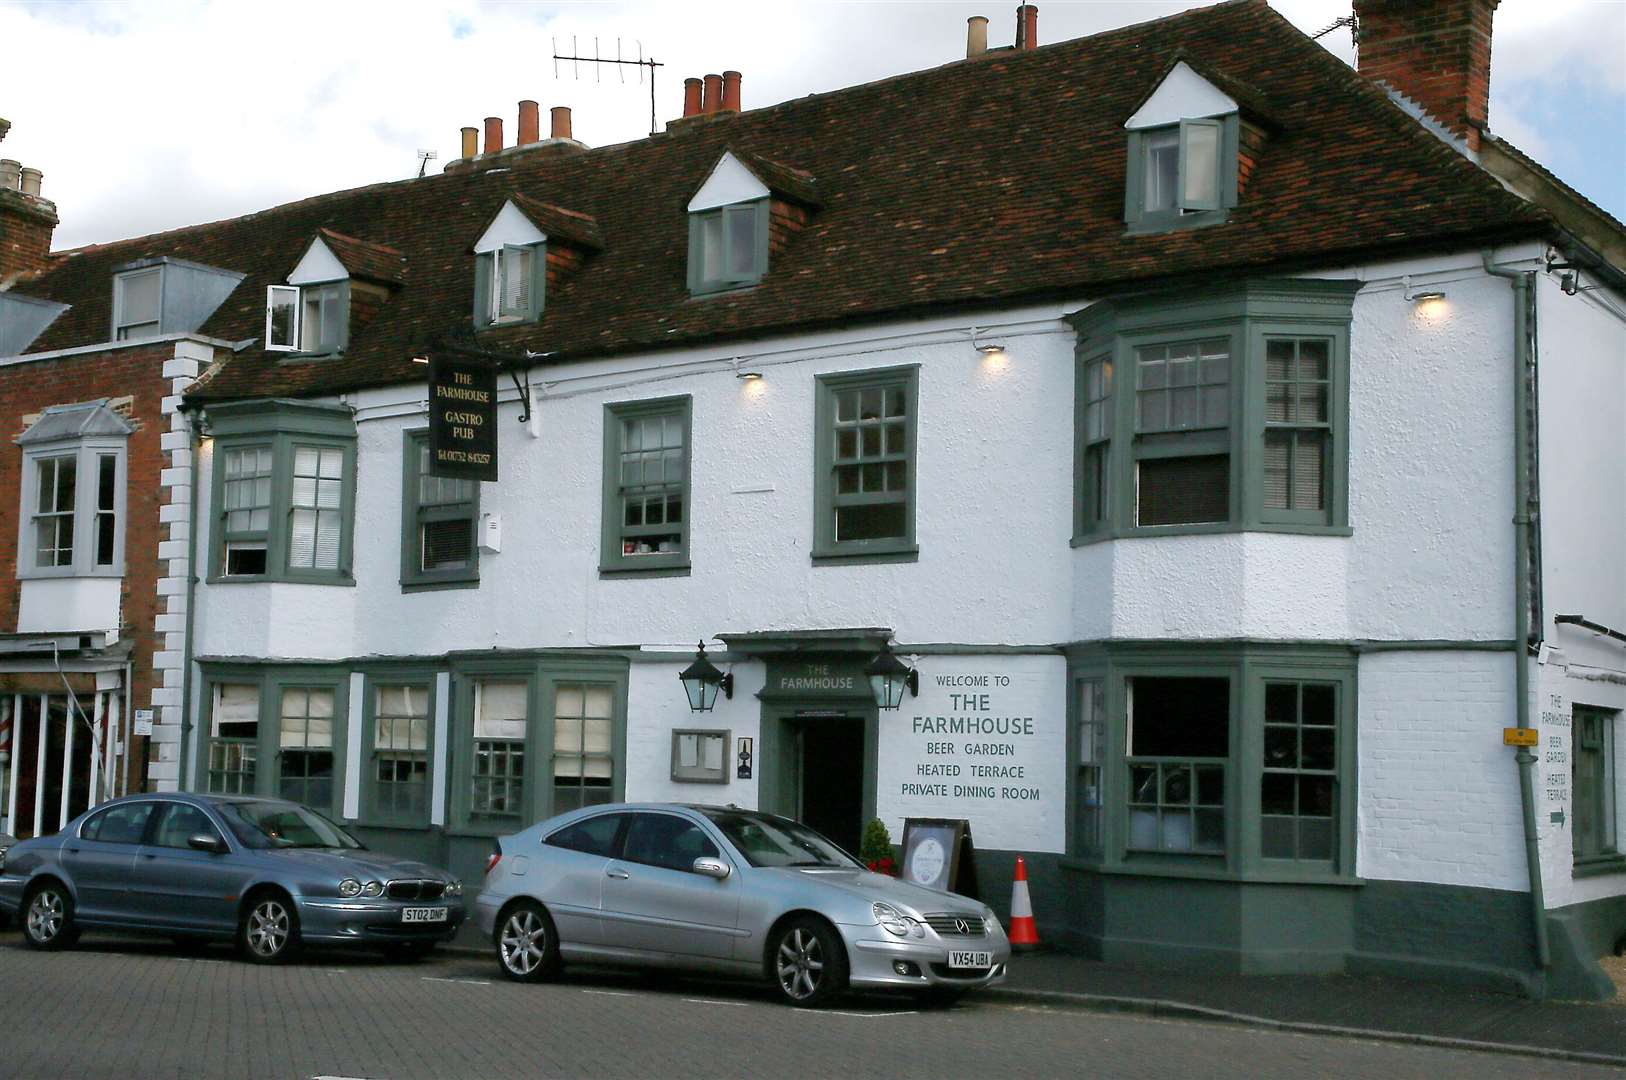 West Malling Pub The Farmhouse Has Alcohol Serving Hours Cut At Licensing Panel Hearing